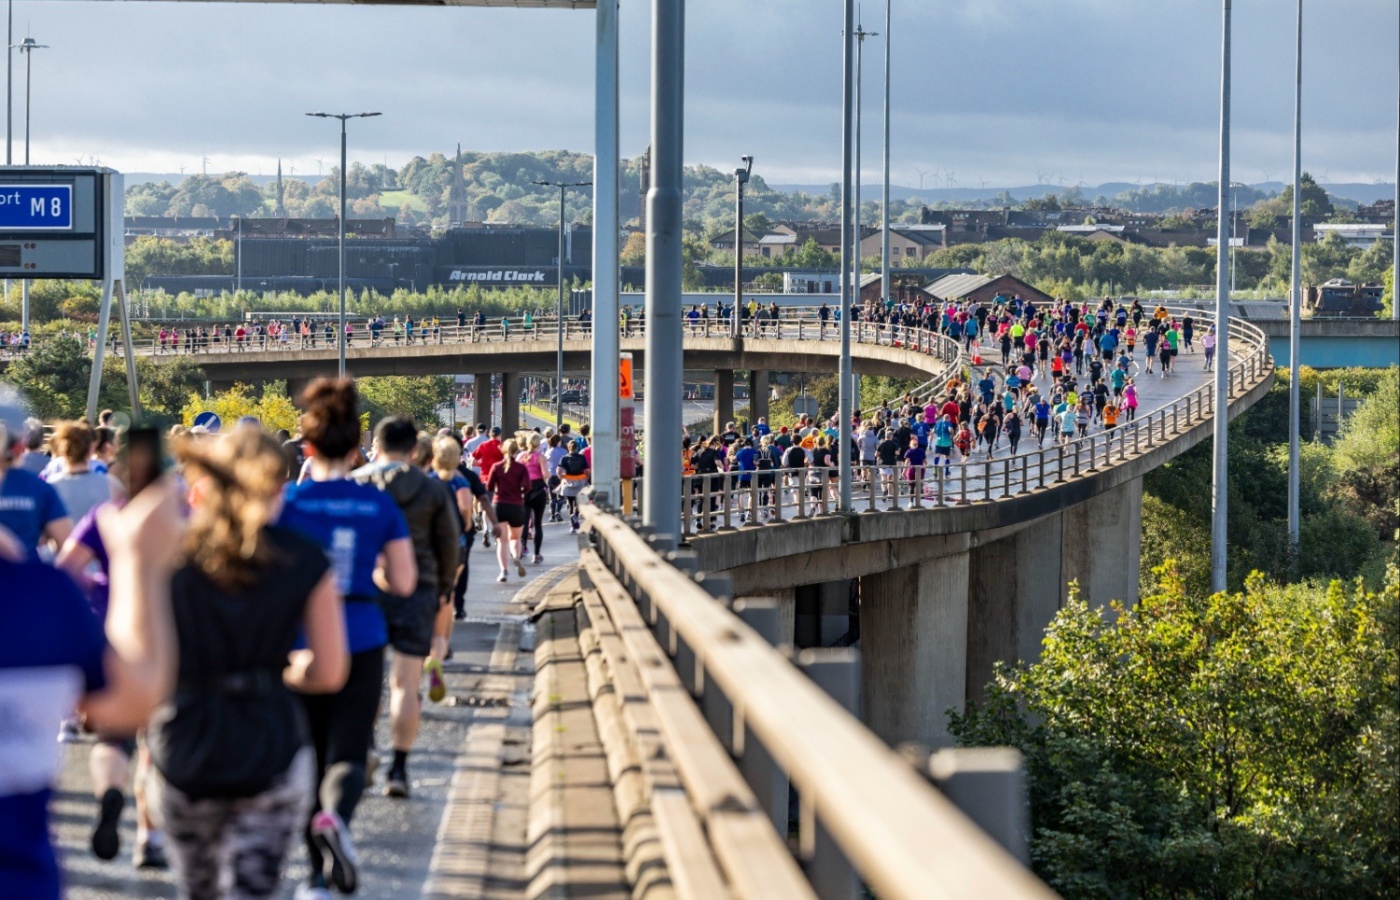 Glasgow was abuzz as the Great Scottish Run made its annual return to the city’s streets.